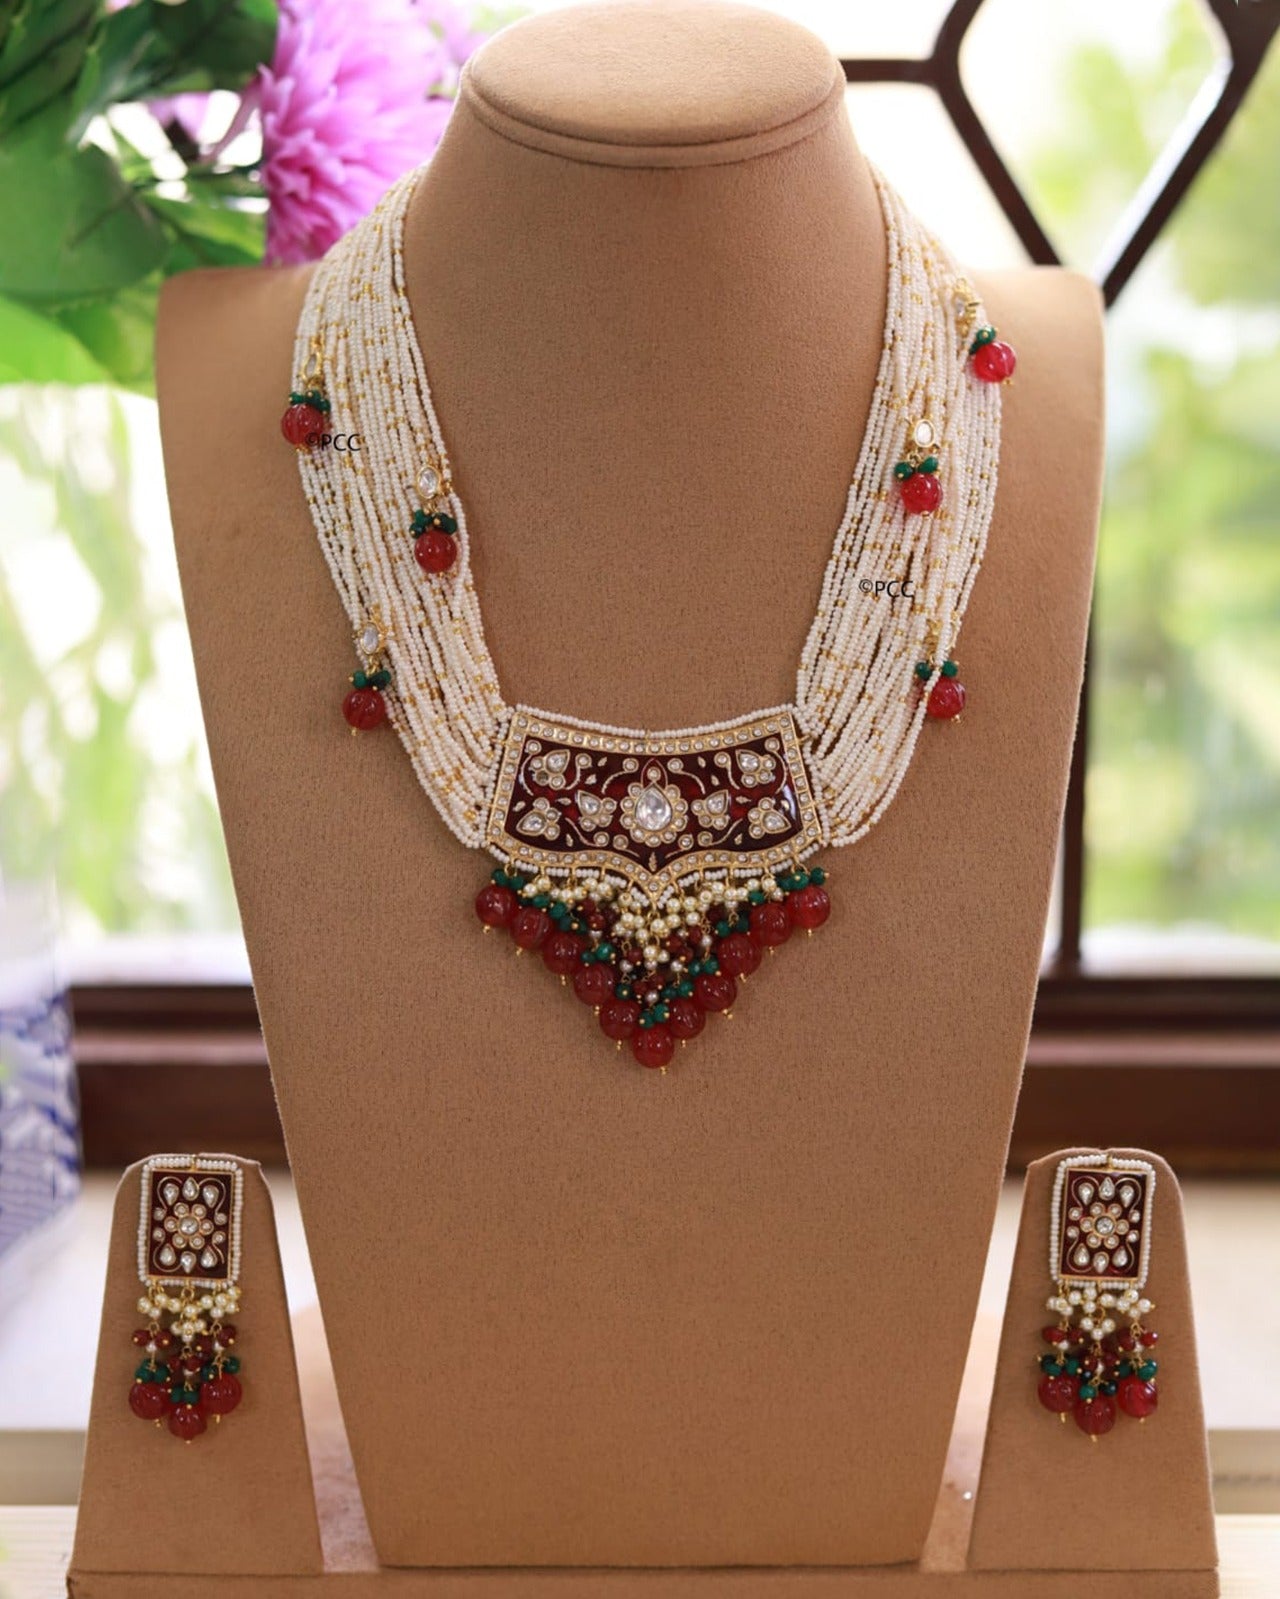 White & Red Statement Necklace